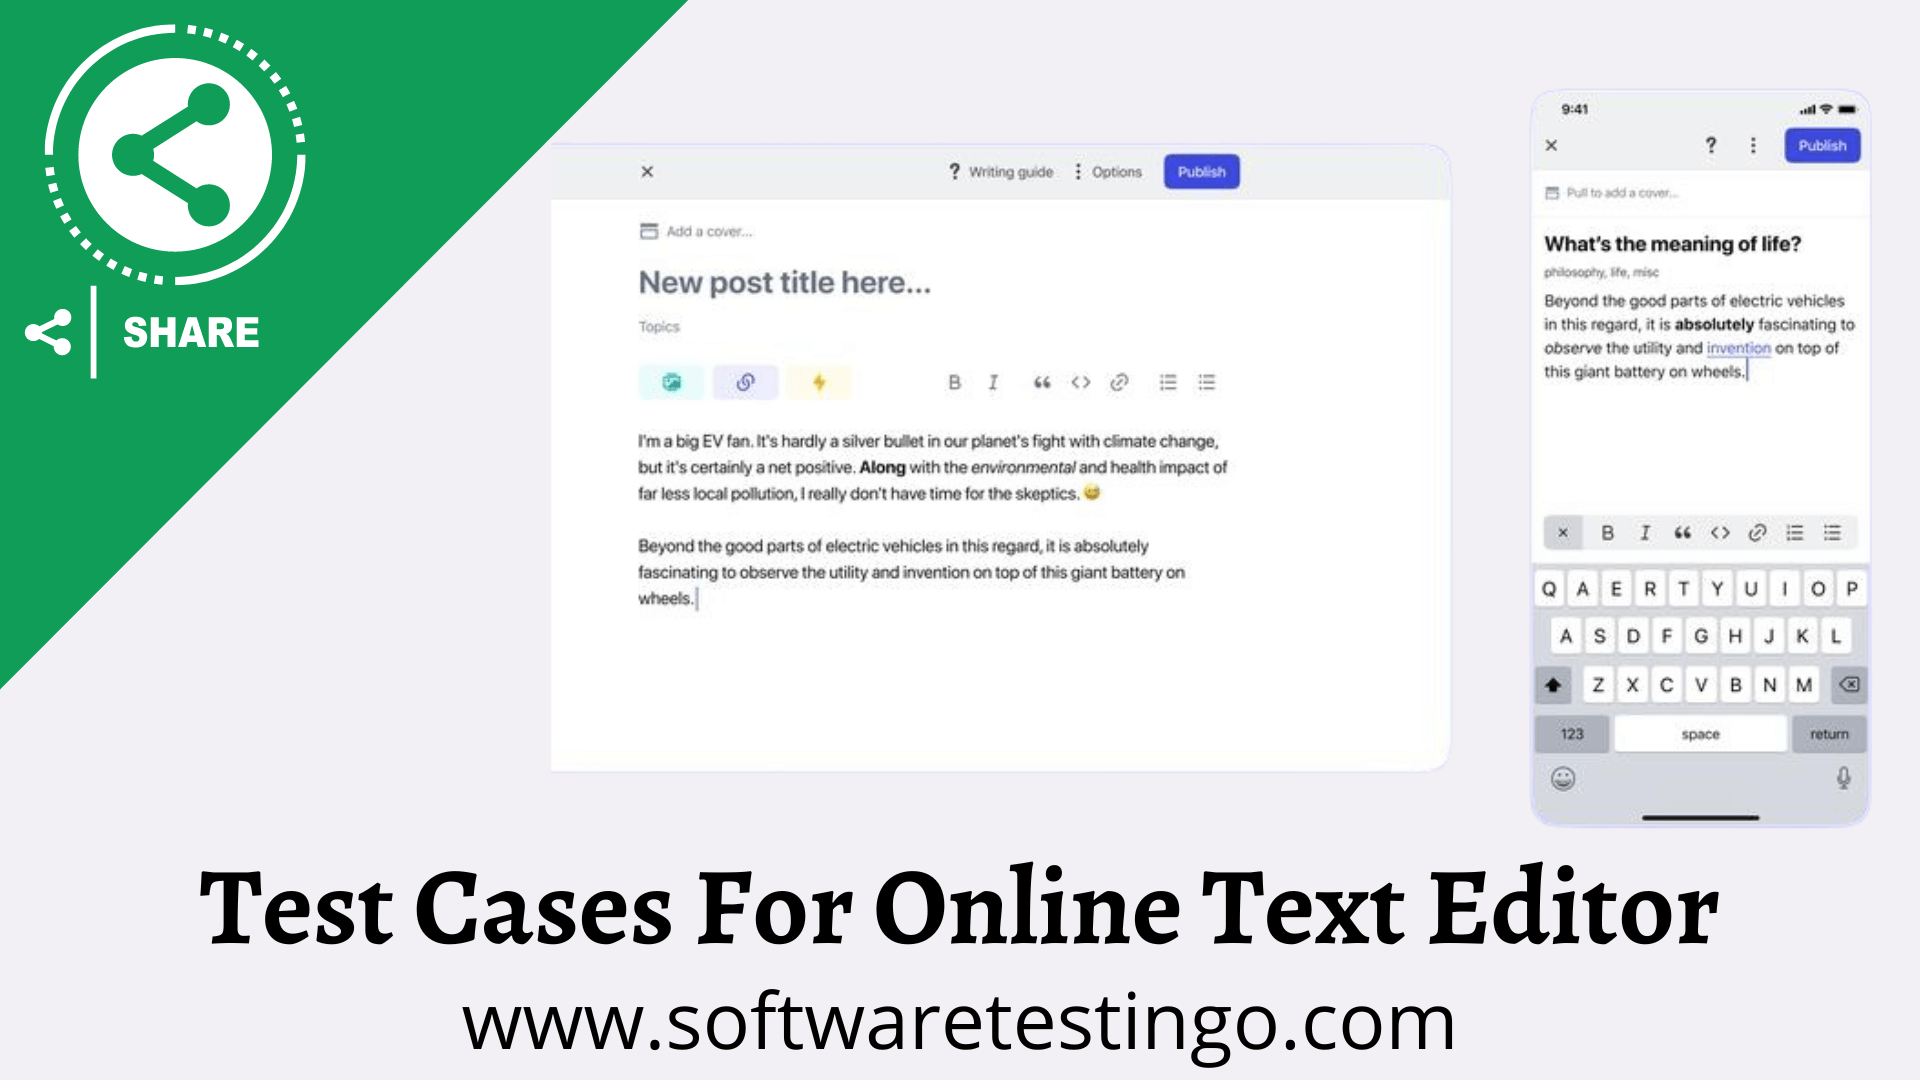 Test Cases For Online Text Editor